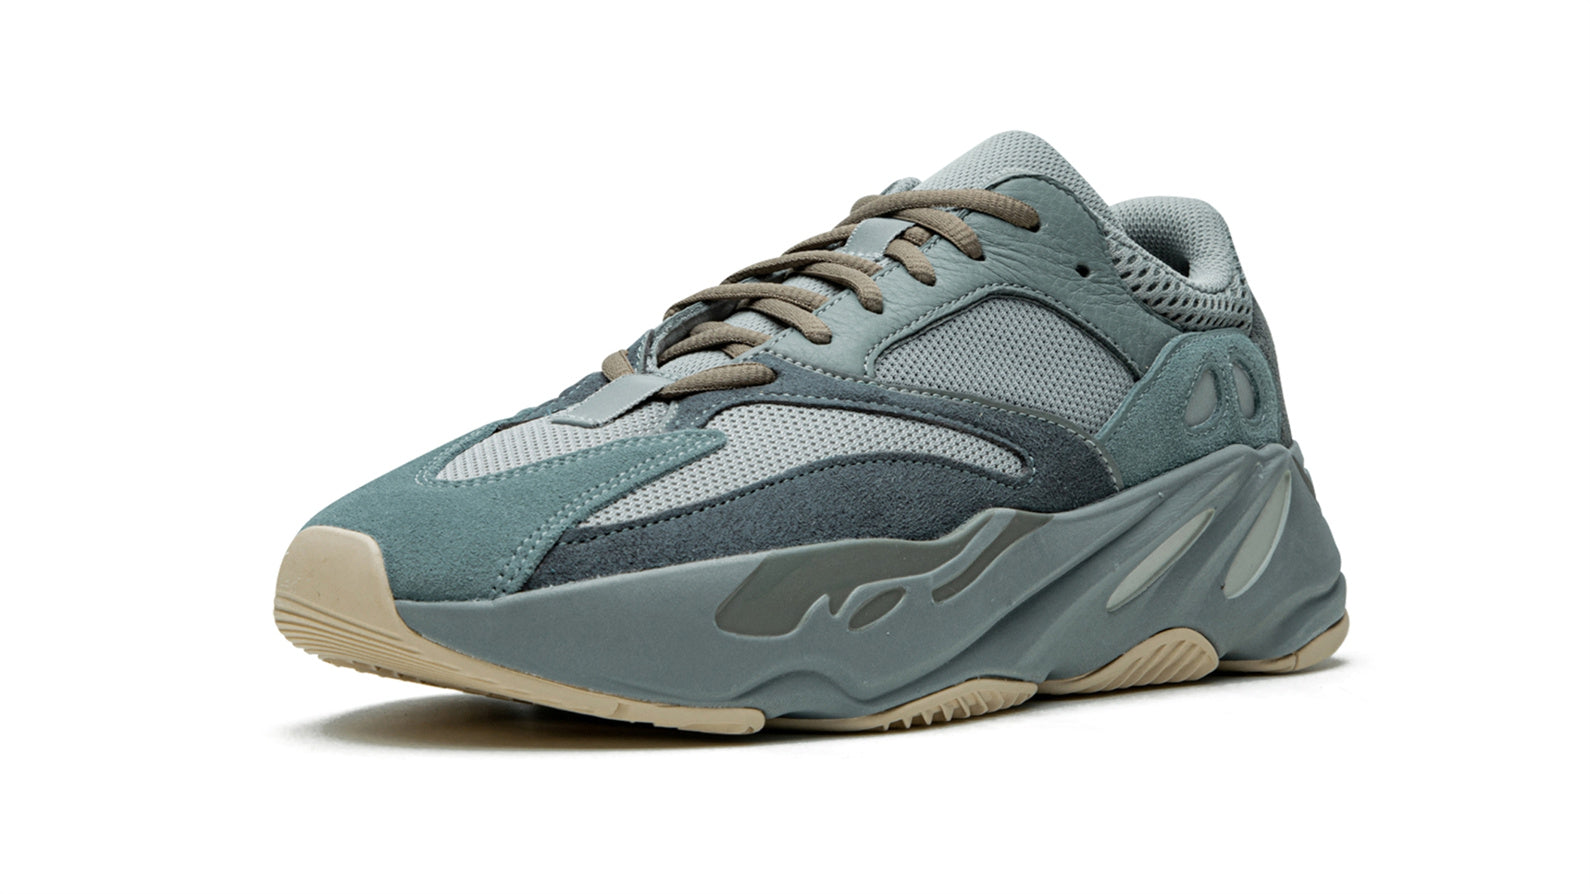 YEEZY BOOST 700 "Teal Blue"